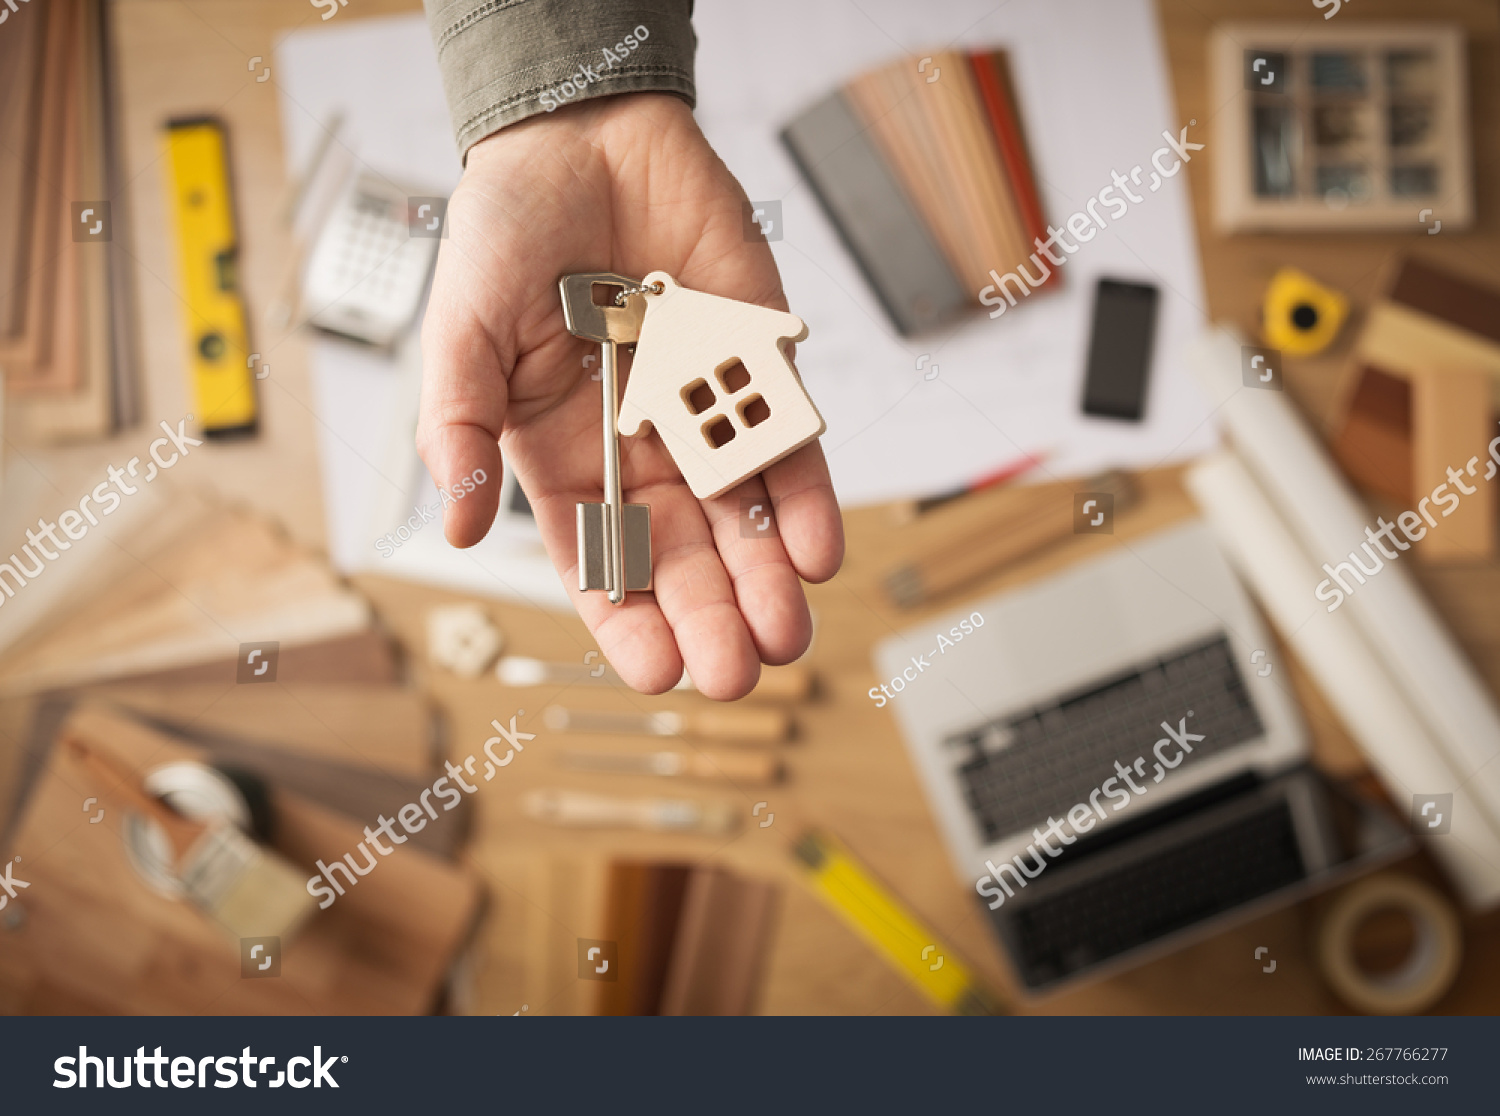 Real estate agent handing over a house key, desktop with tools, wood swatches and computer on background, top view #267766277